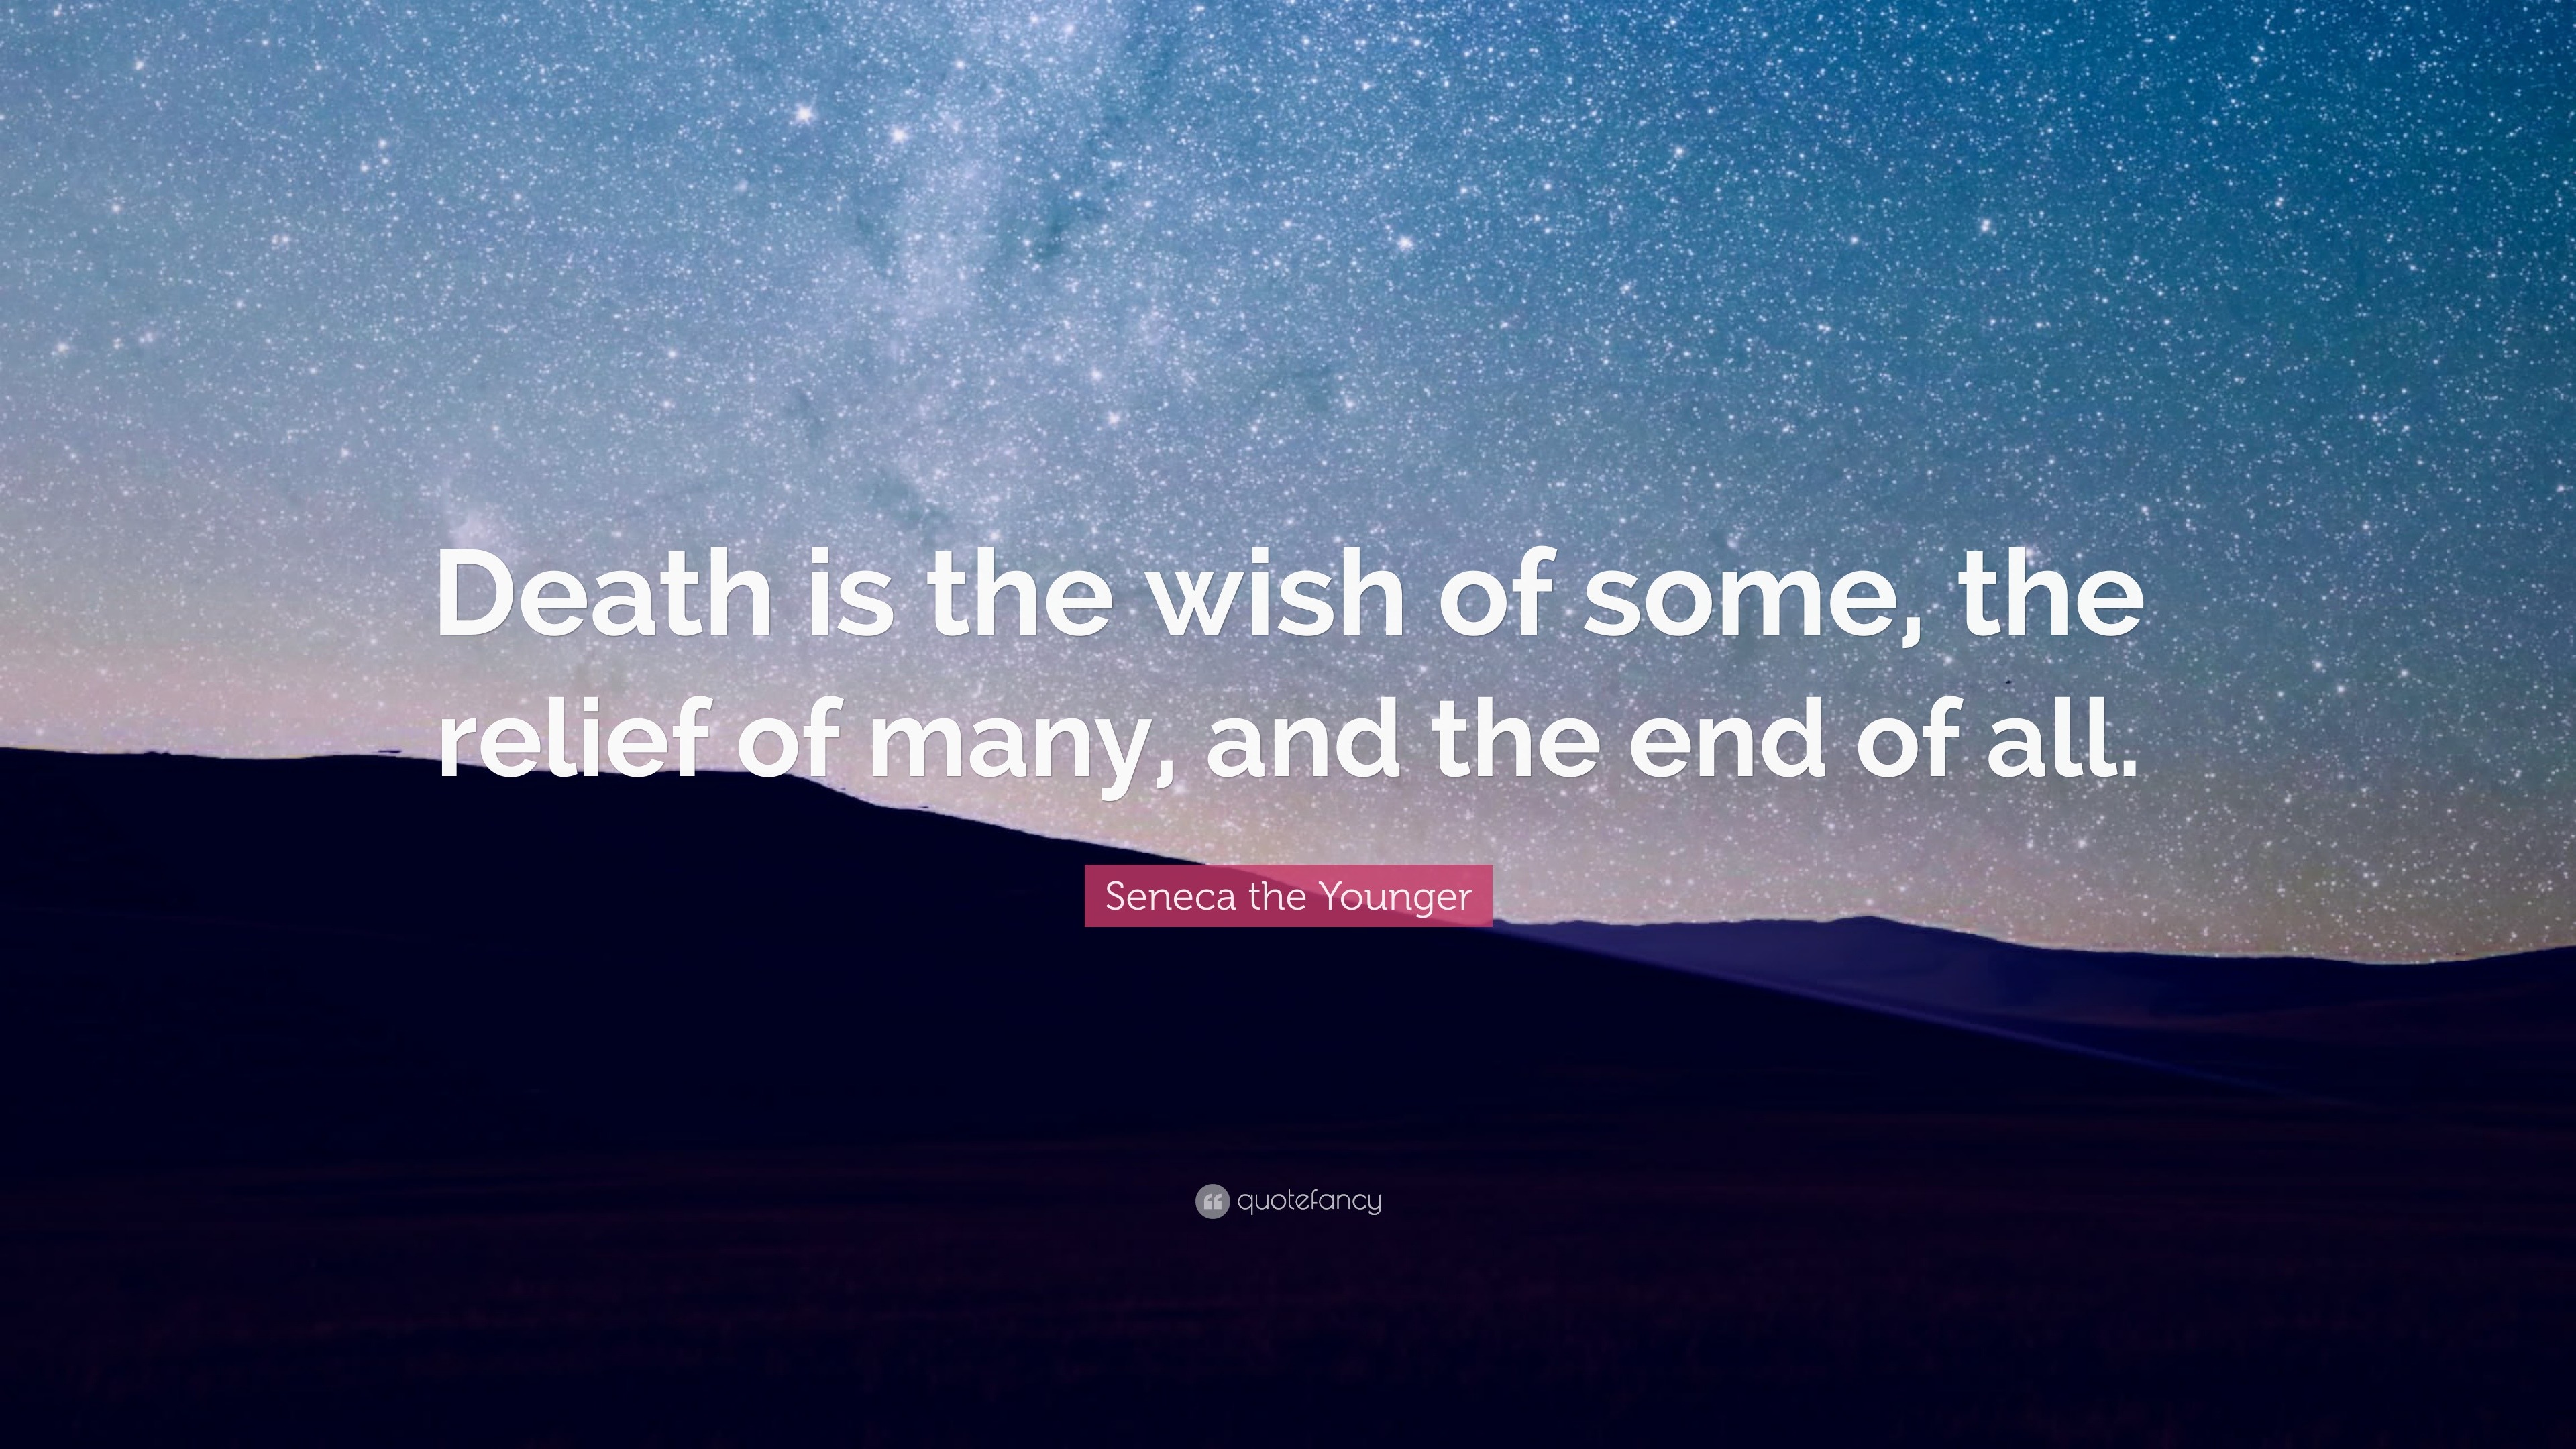 Seneca the Younger Quote: “Death is the wish of some, the relief of ...